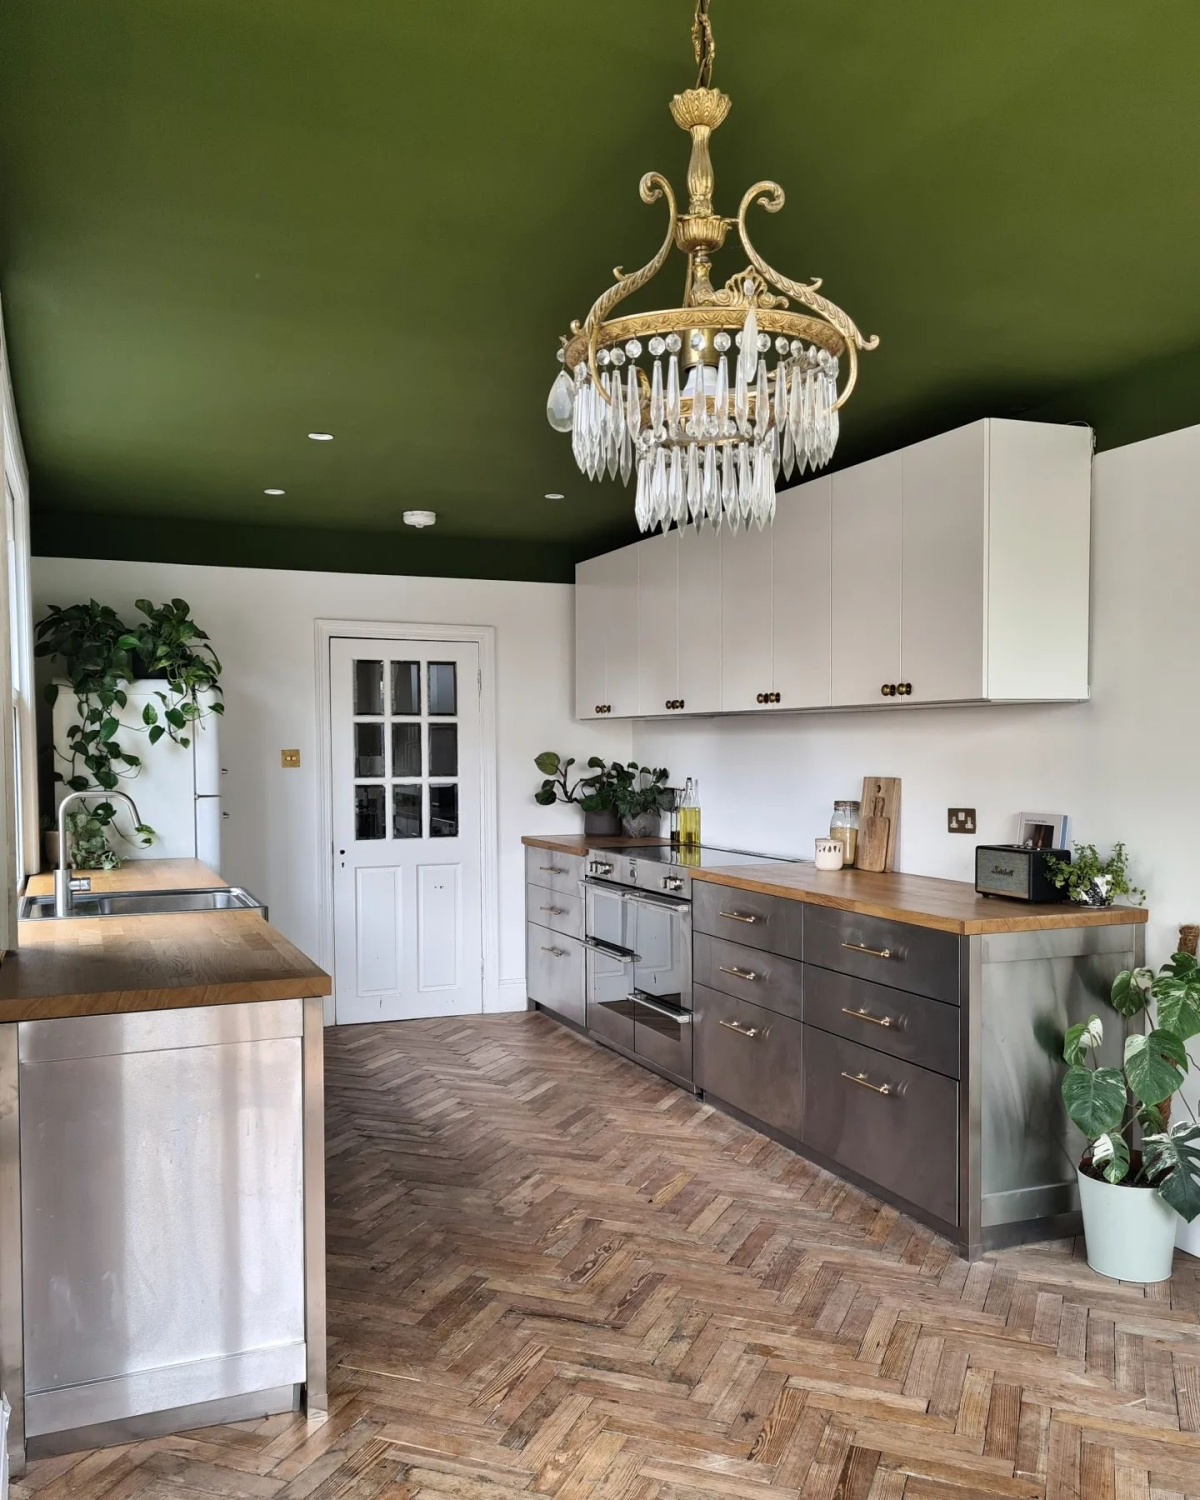 kitchen with painted ceiling in green